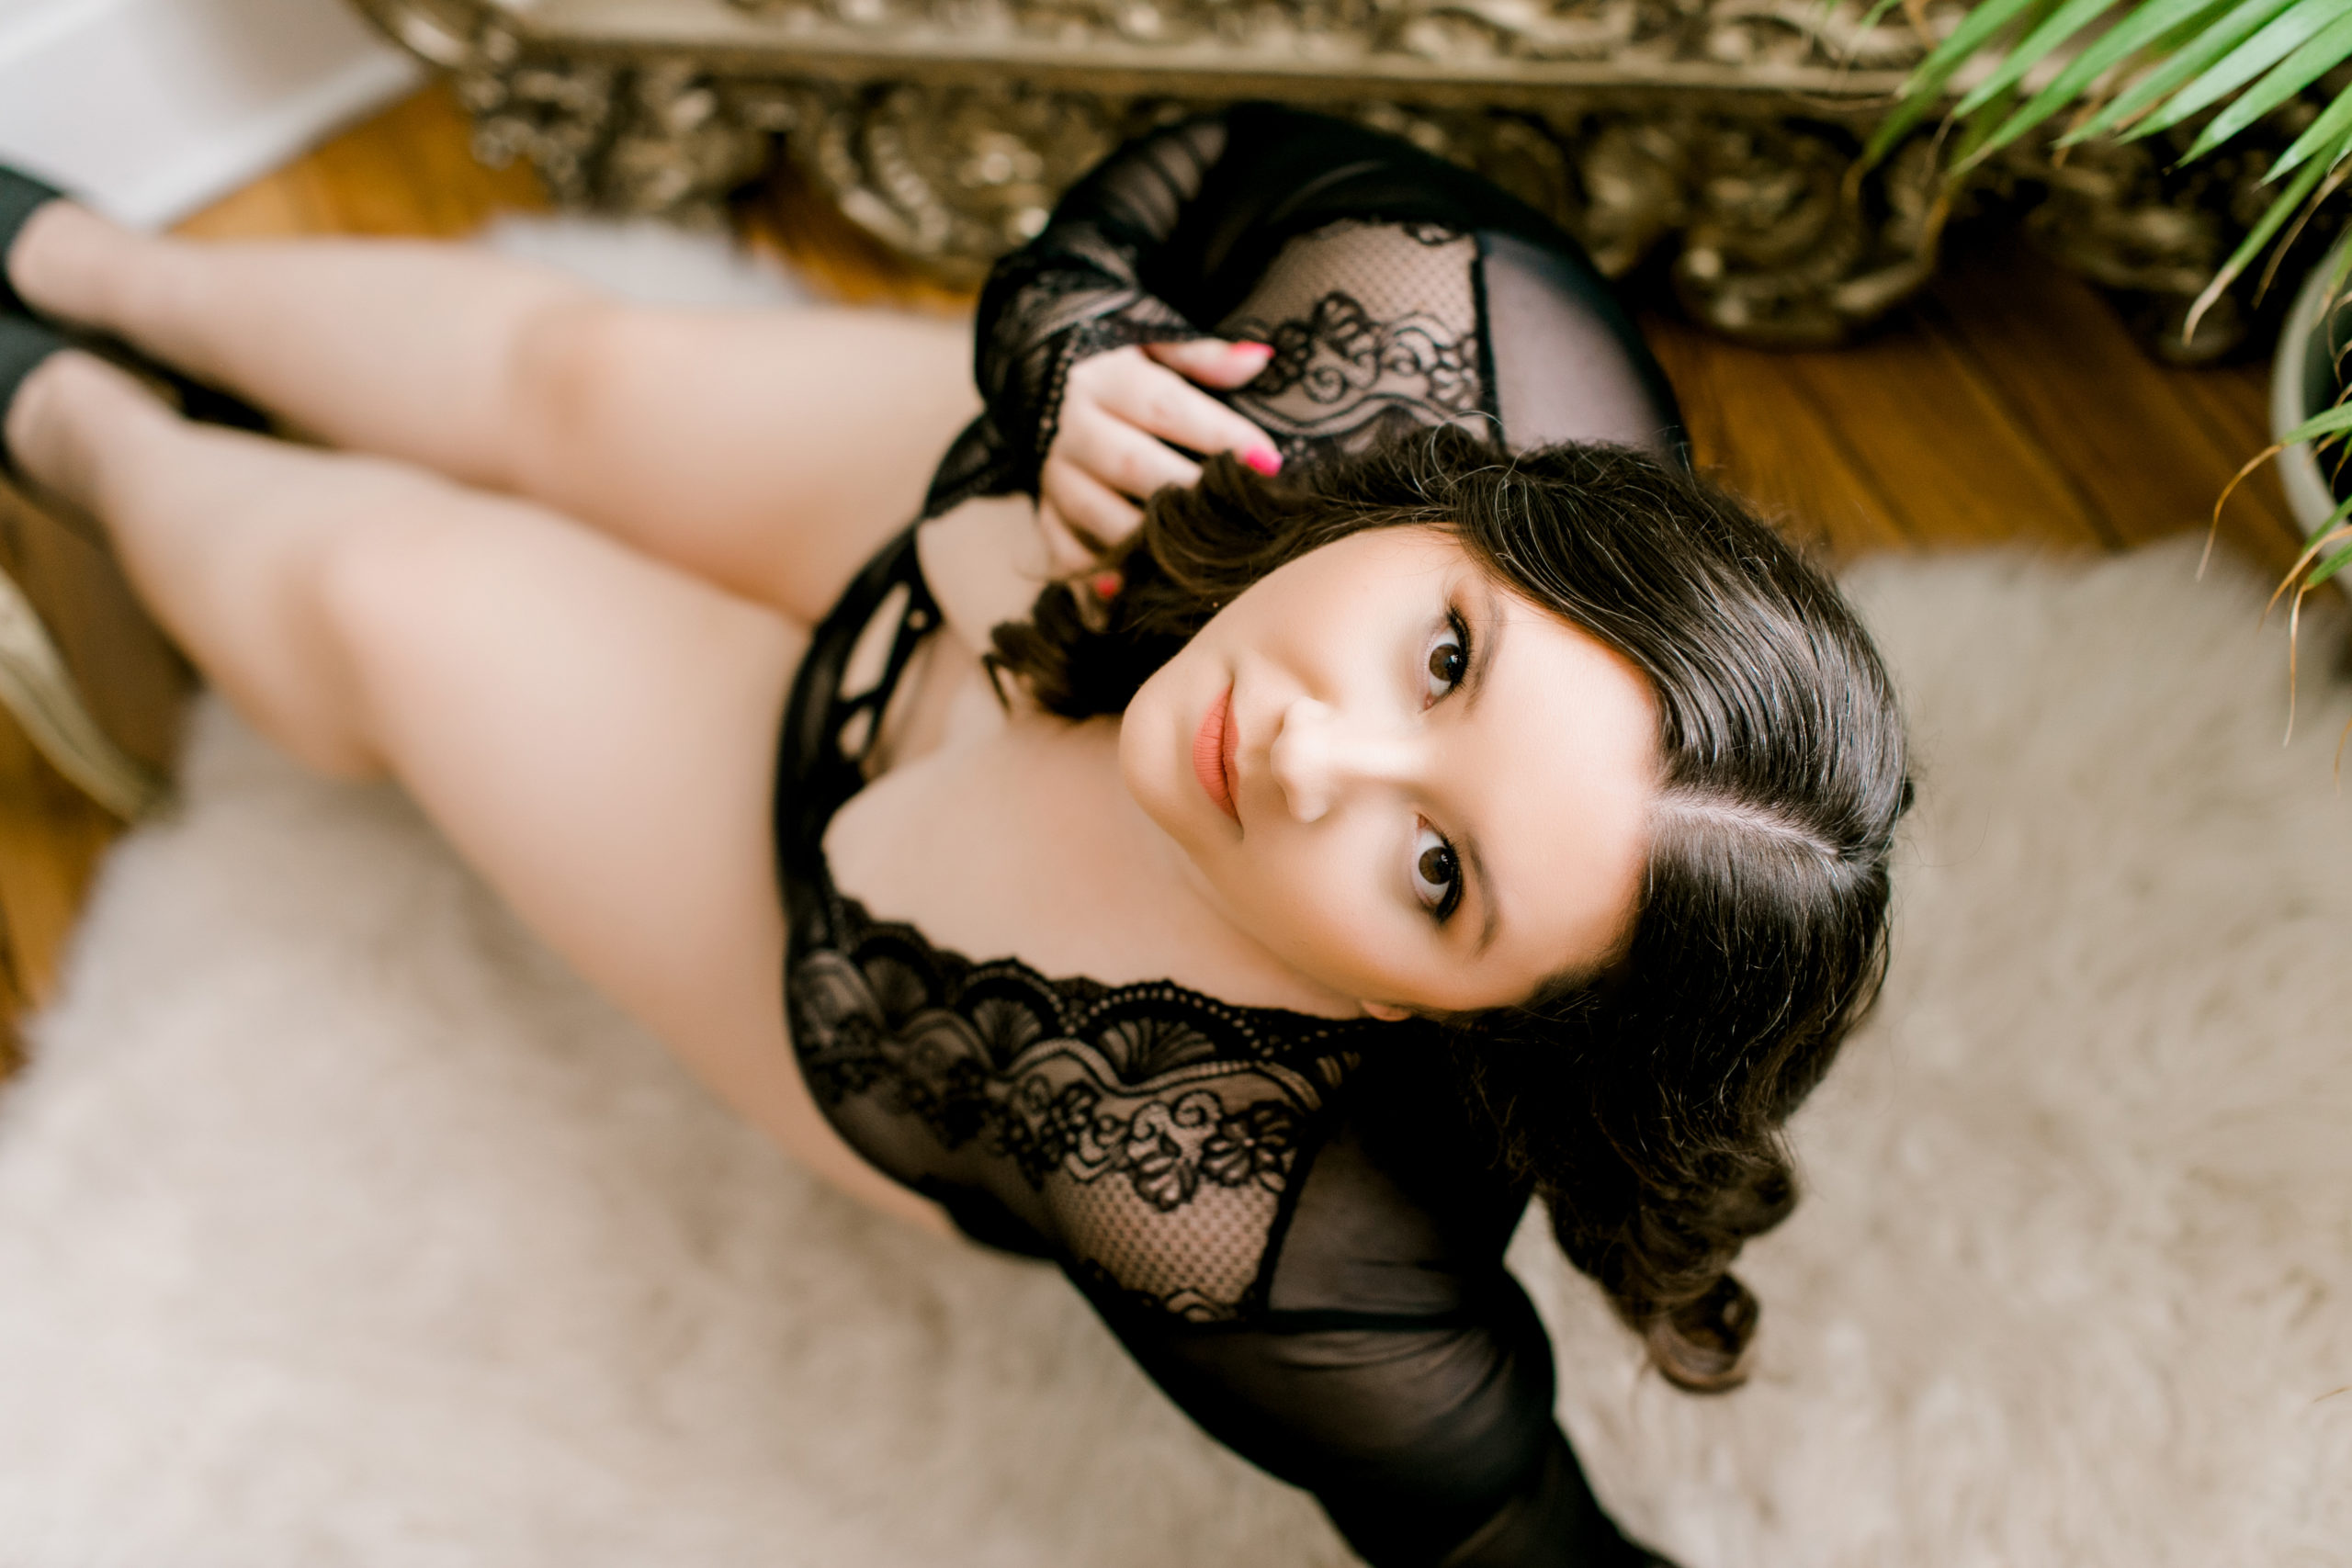 Our stunning full size gold mirror set is a favorite for many who come to our studio. Beauty C brought the romance with an intricate sheer  lace bodysuit in black. The long sleeves and flattering cut were the perfect classic pick! 